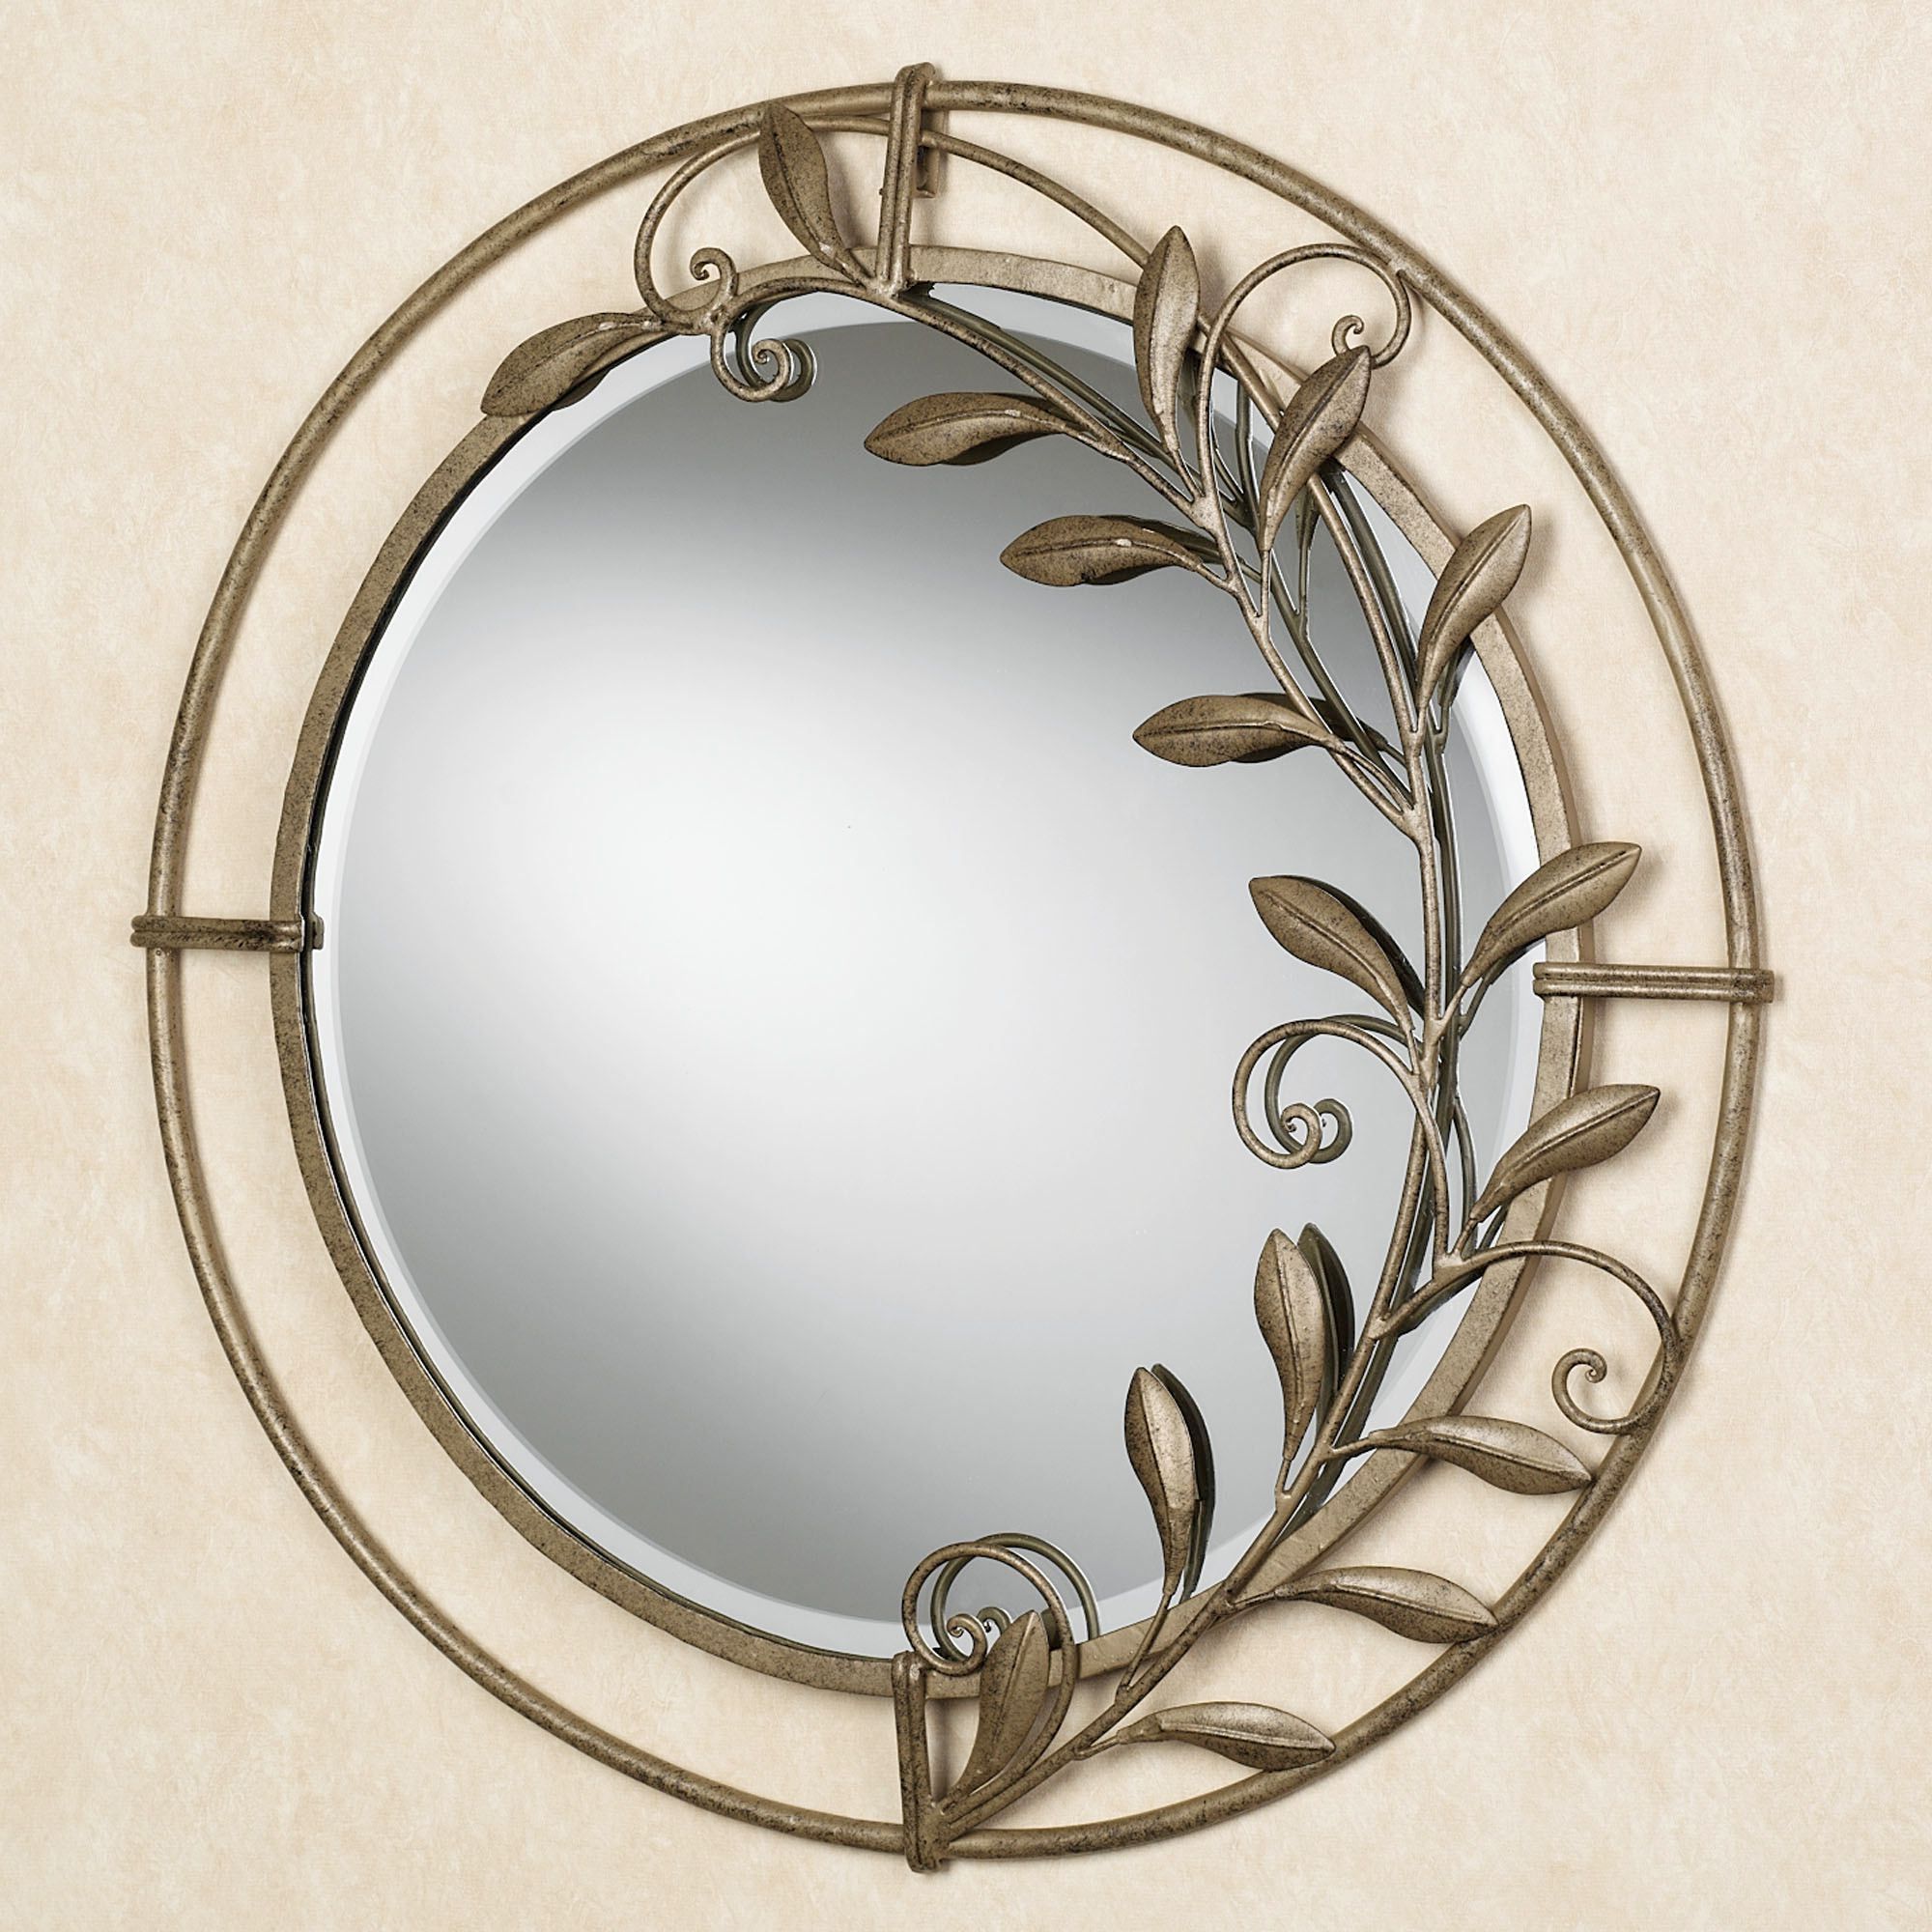 Gold Rounded Edge Mirrors Throughout Widely Used Galeazzo Antique Gold Round Metal Wall Mirror (View 12 of 15)